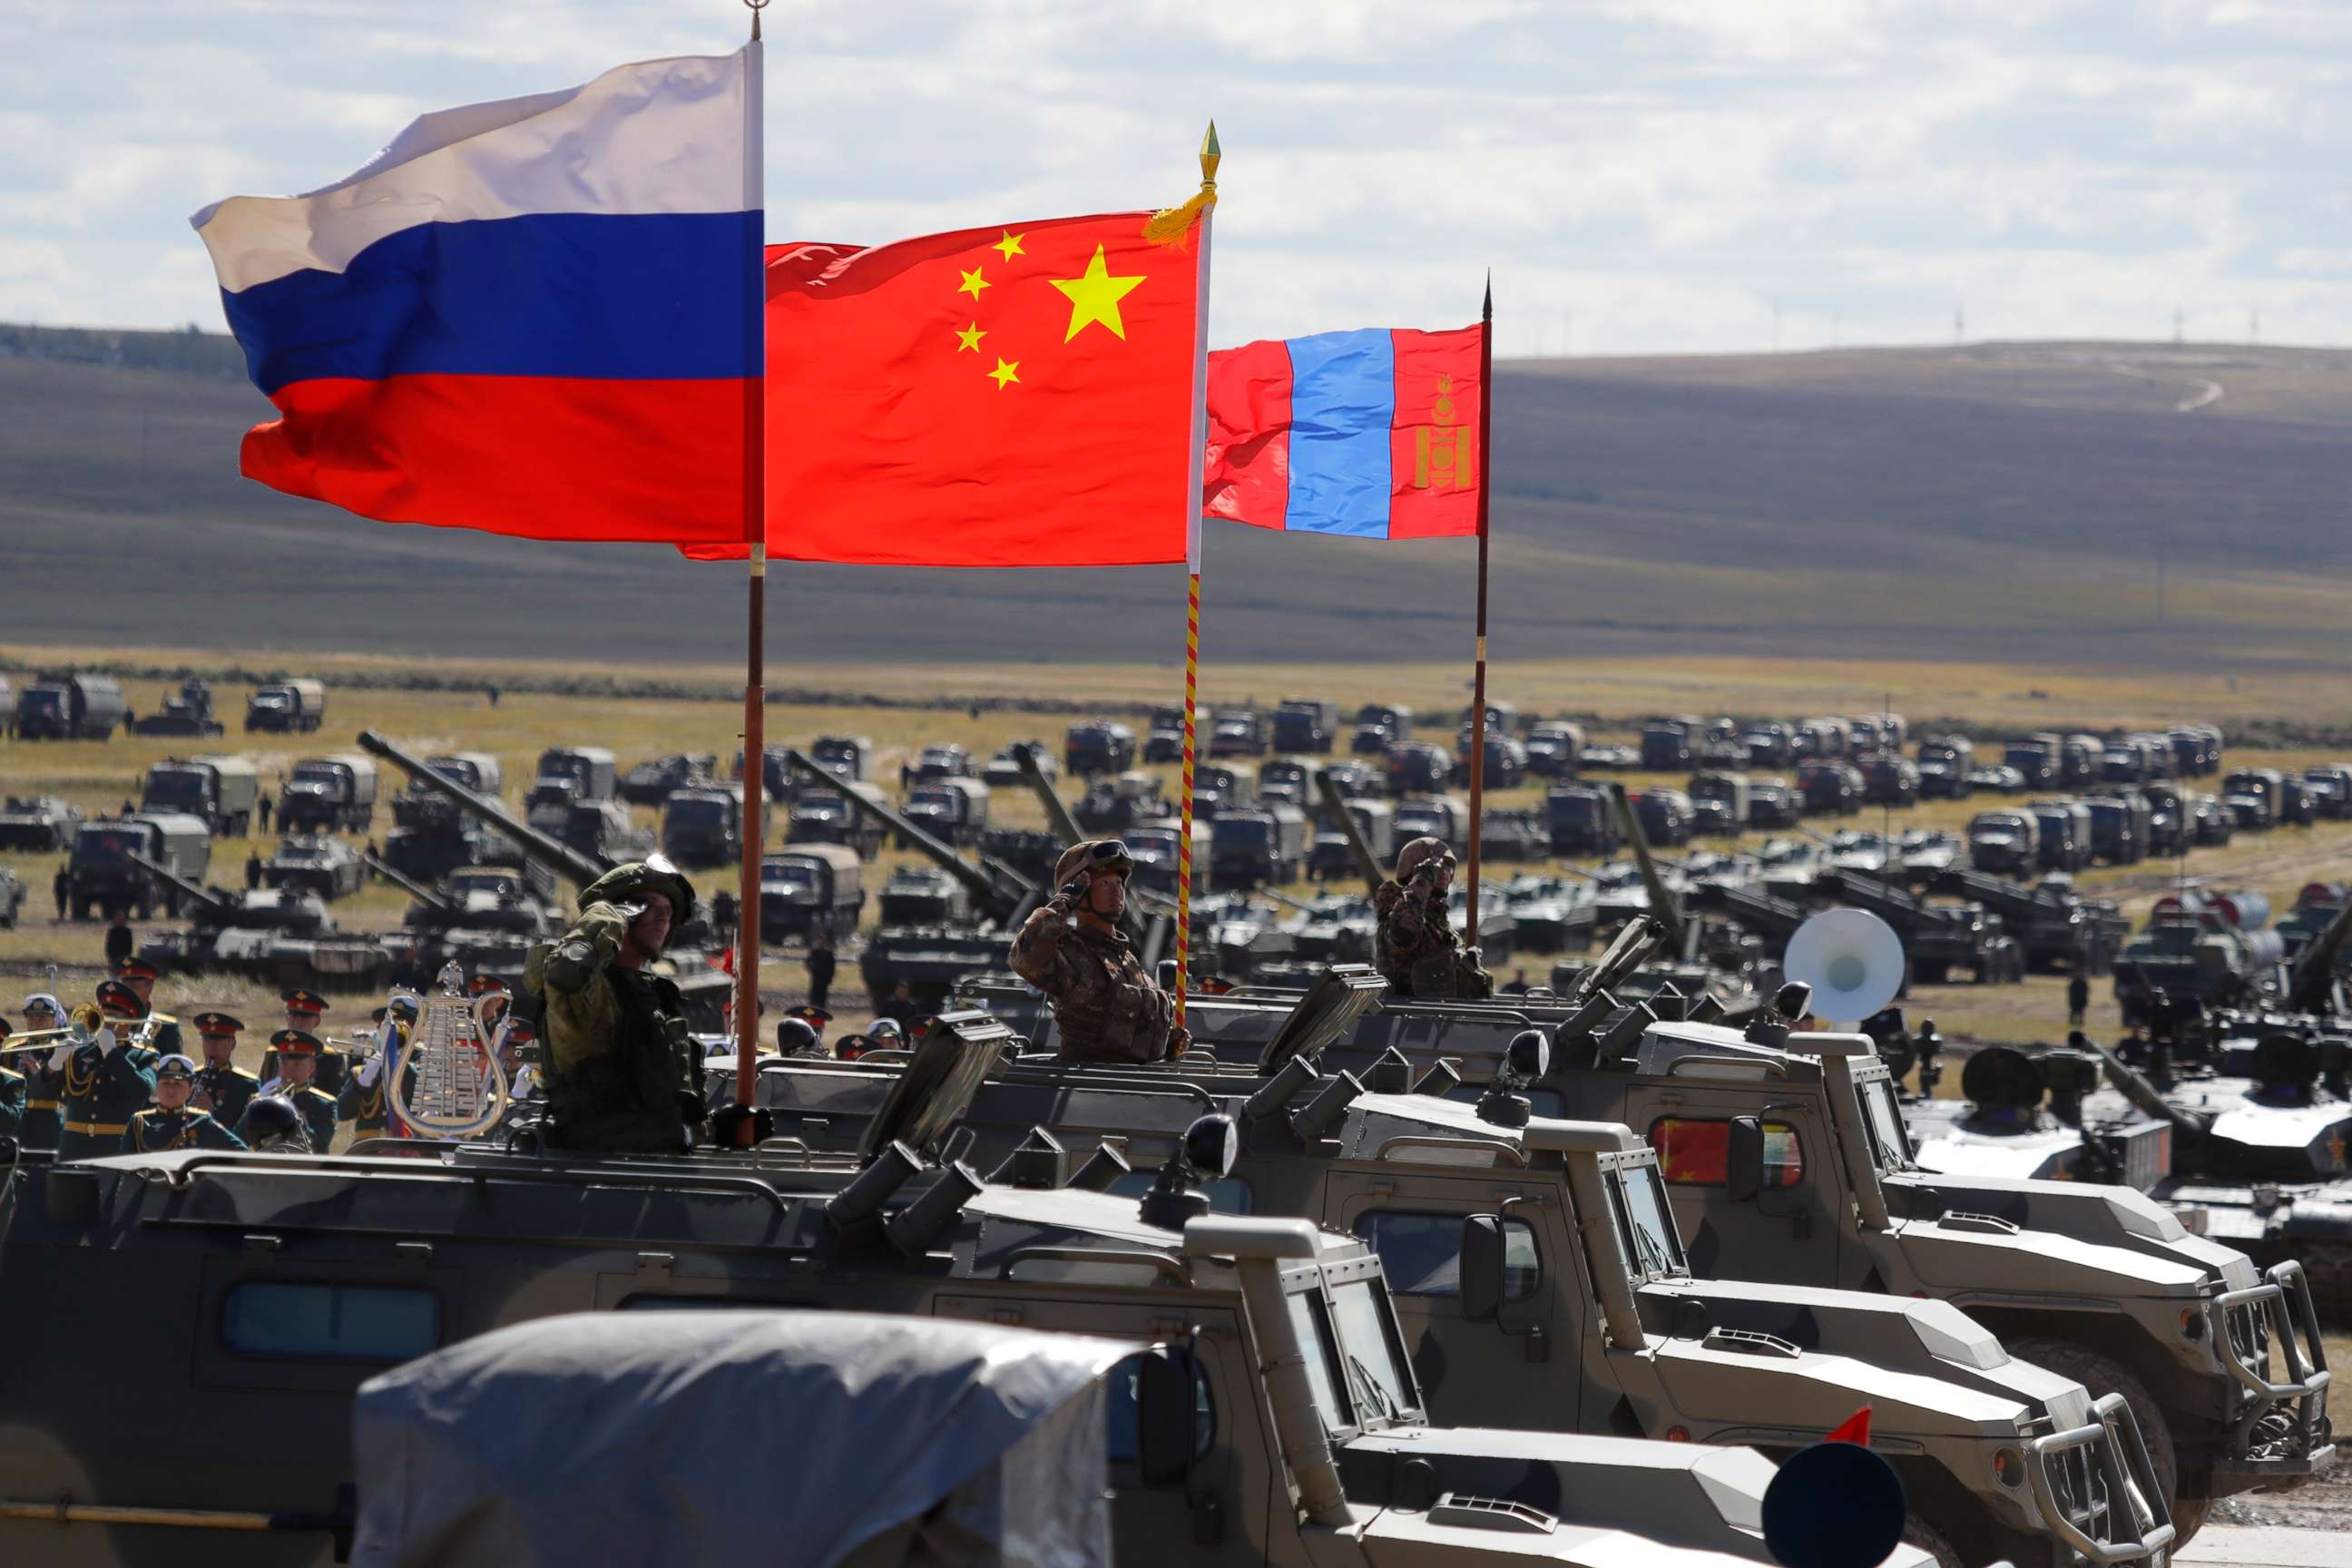 PHOTO: Russian, Chinese and Mongolian national flags set atop armored vehicles during military exercises in Eastern Siberia, Russia, Sept. 13, 2018.